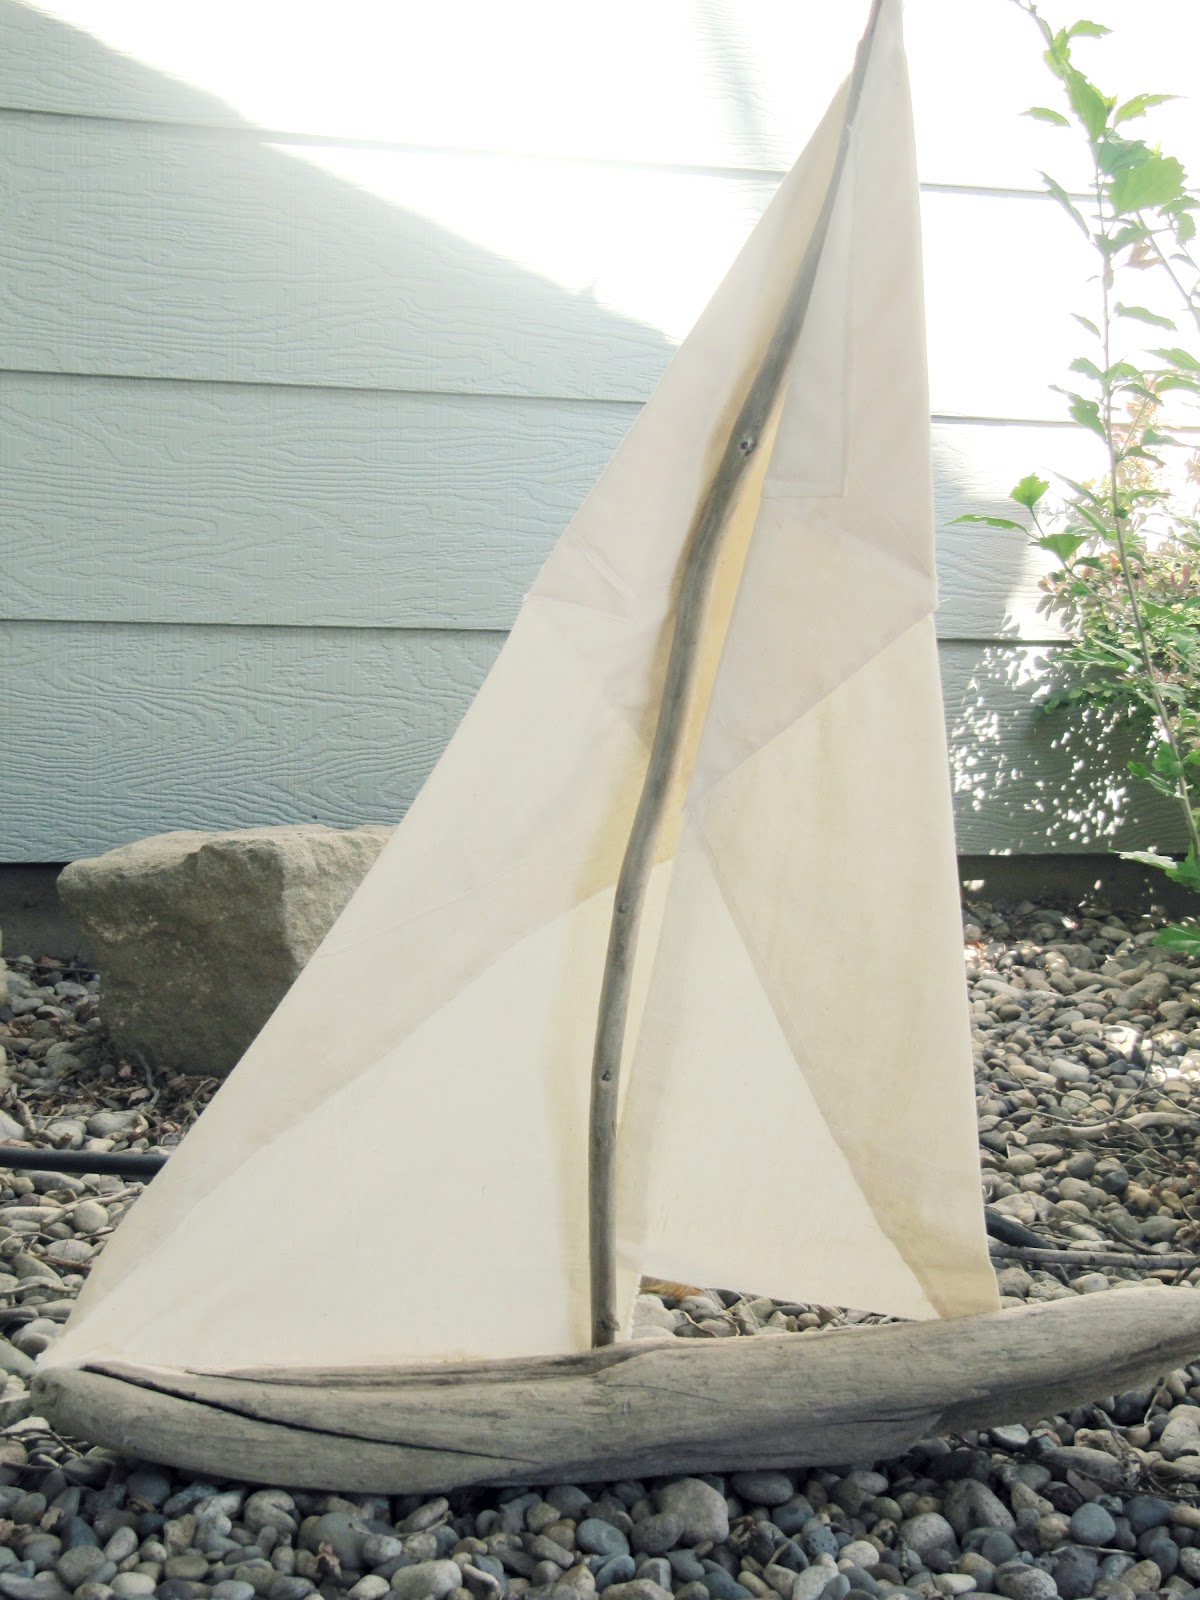 Driftwood Sailboat - The Wicker House